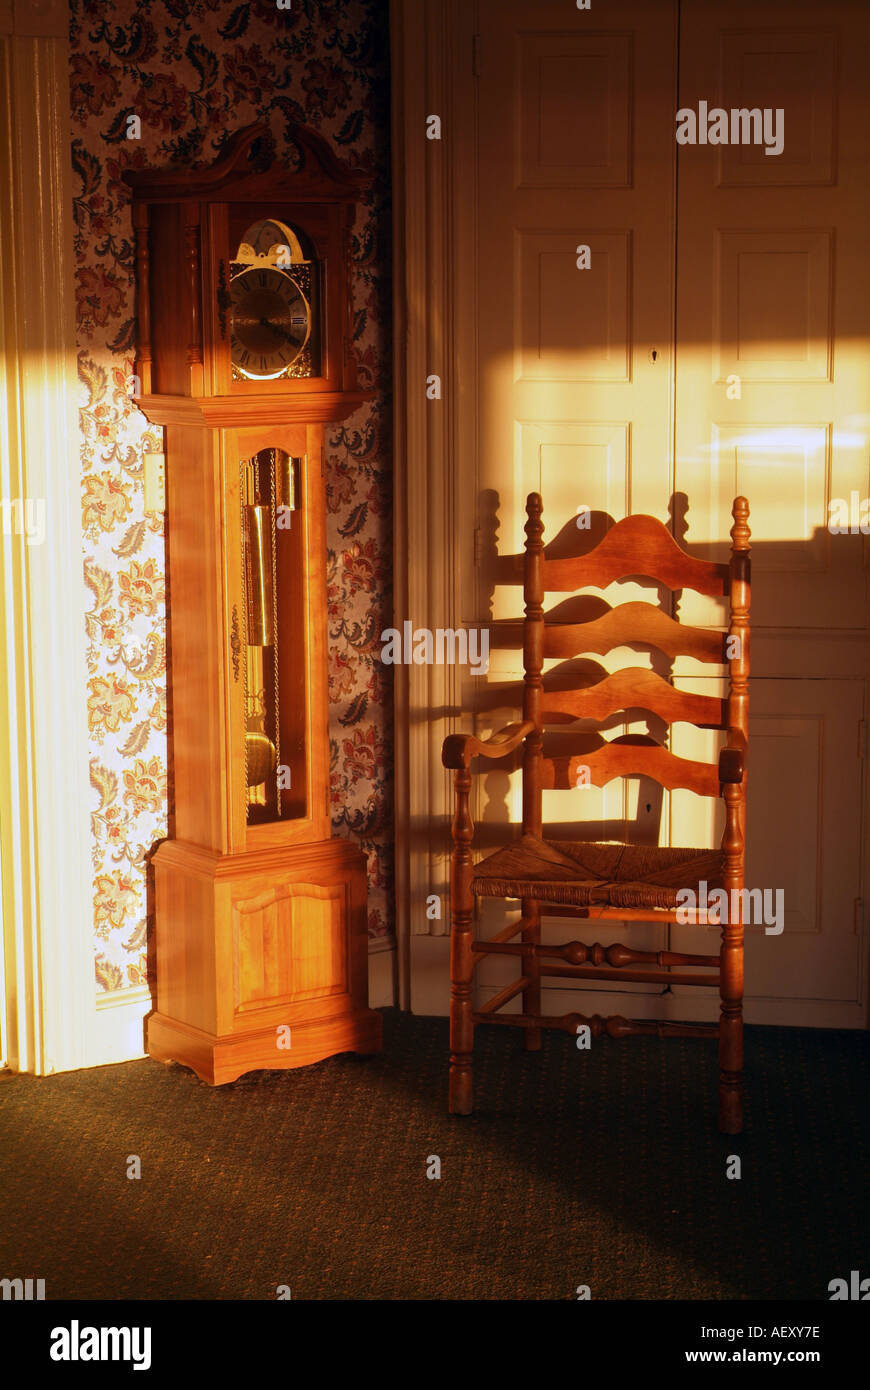 Antique Chair and Clock in an old Mansion Stock Photo